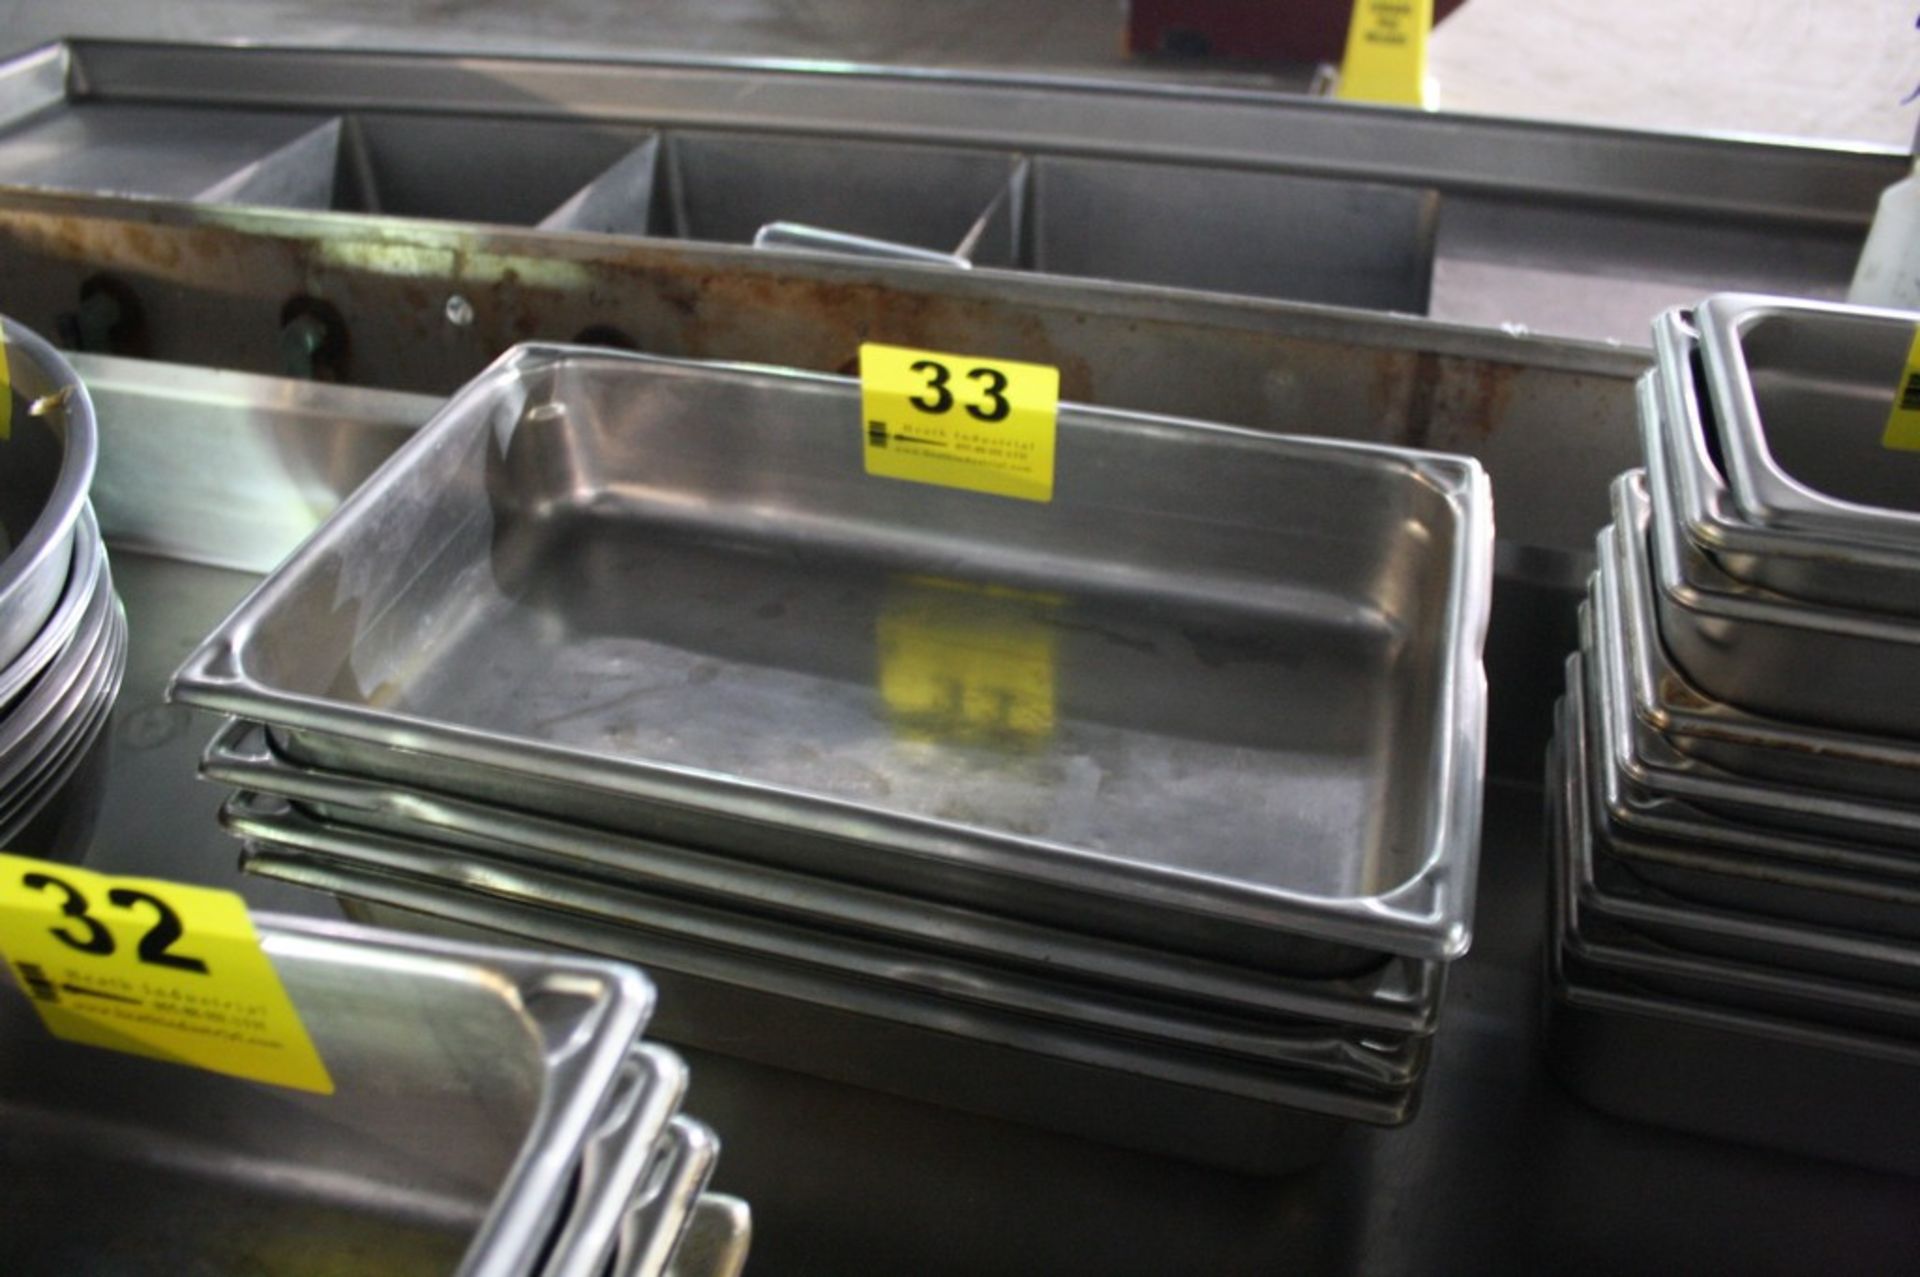 (4) STAINLESS STEEL SERVING TRAYS-21" X 12"